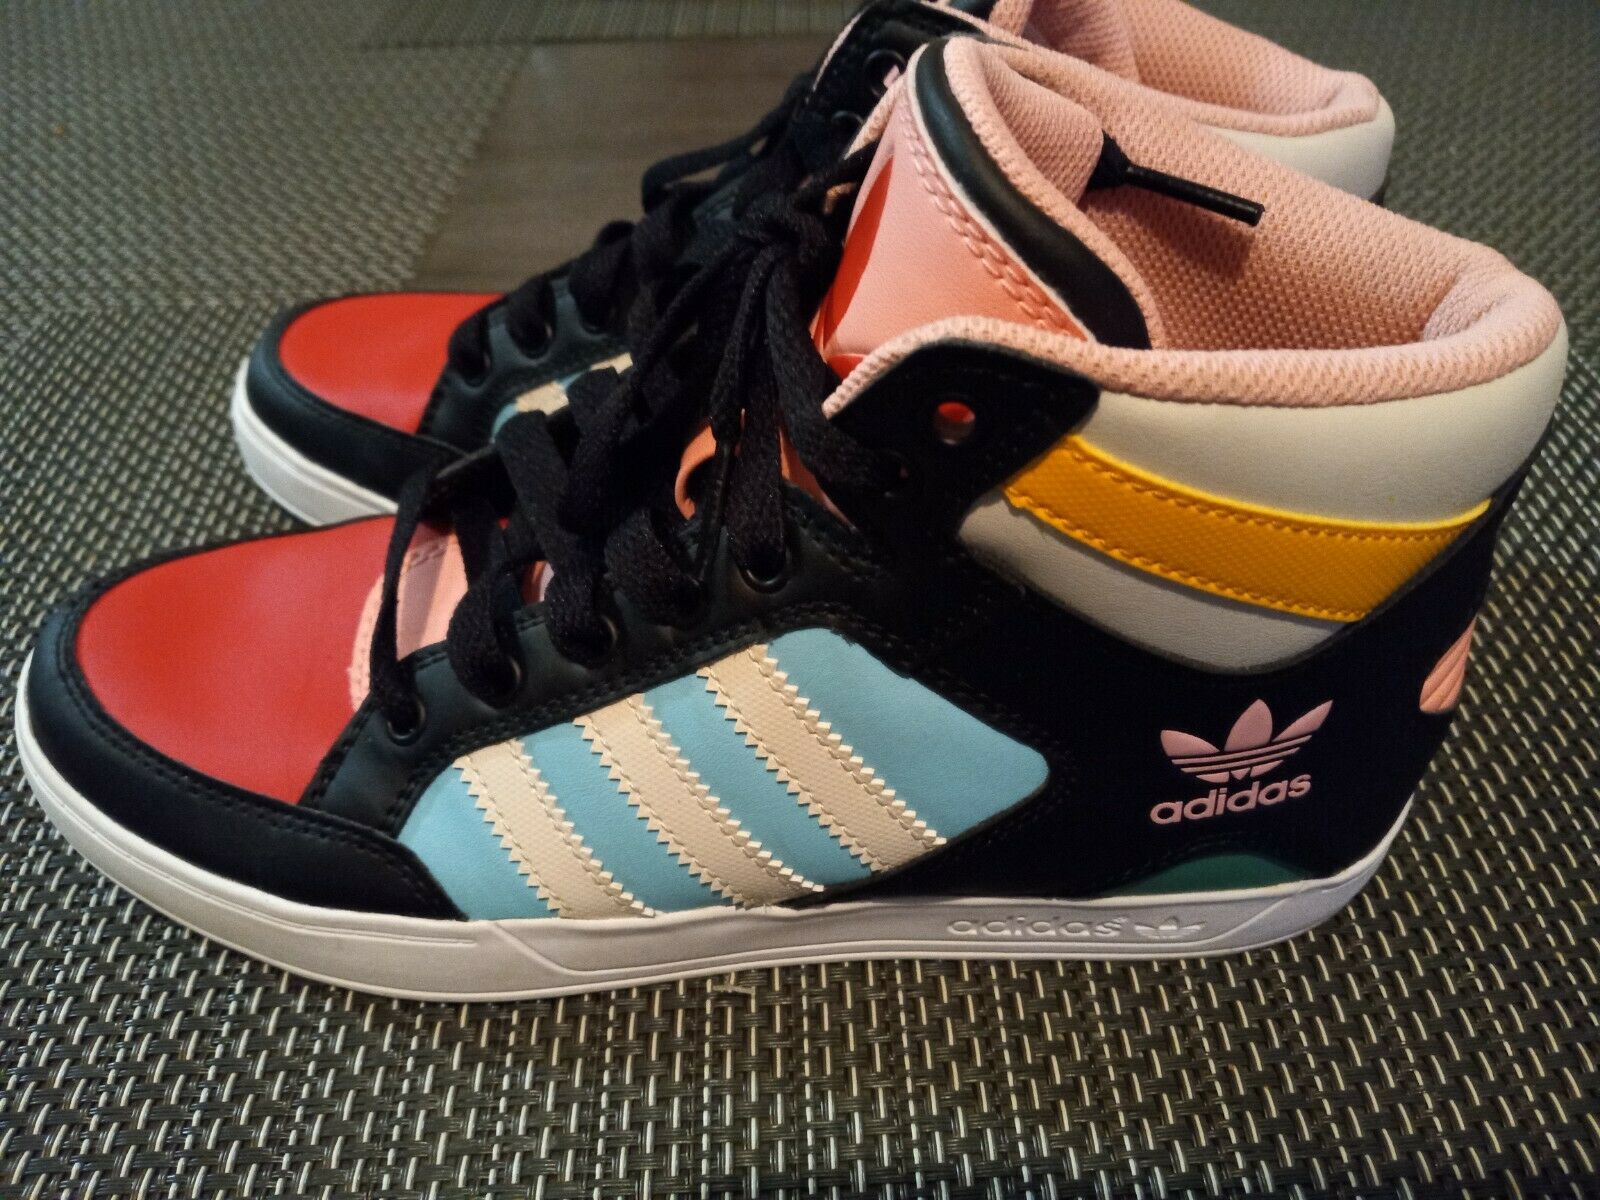 Adidas High Tops Shoes For Women